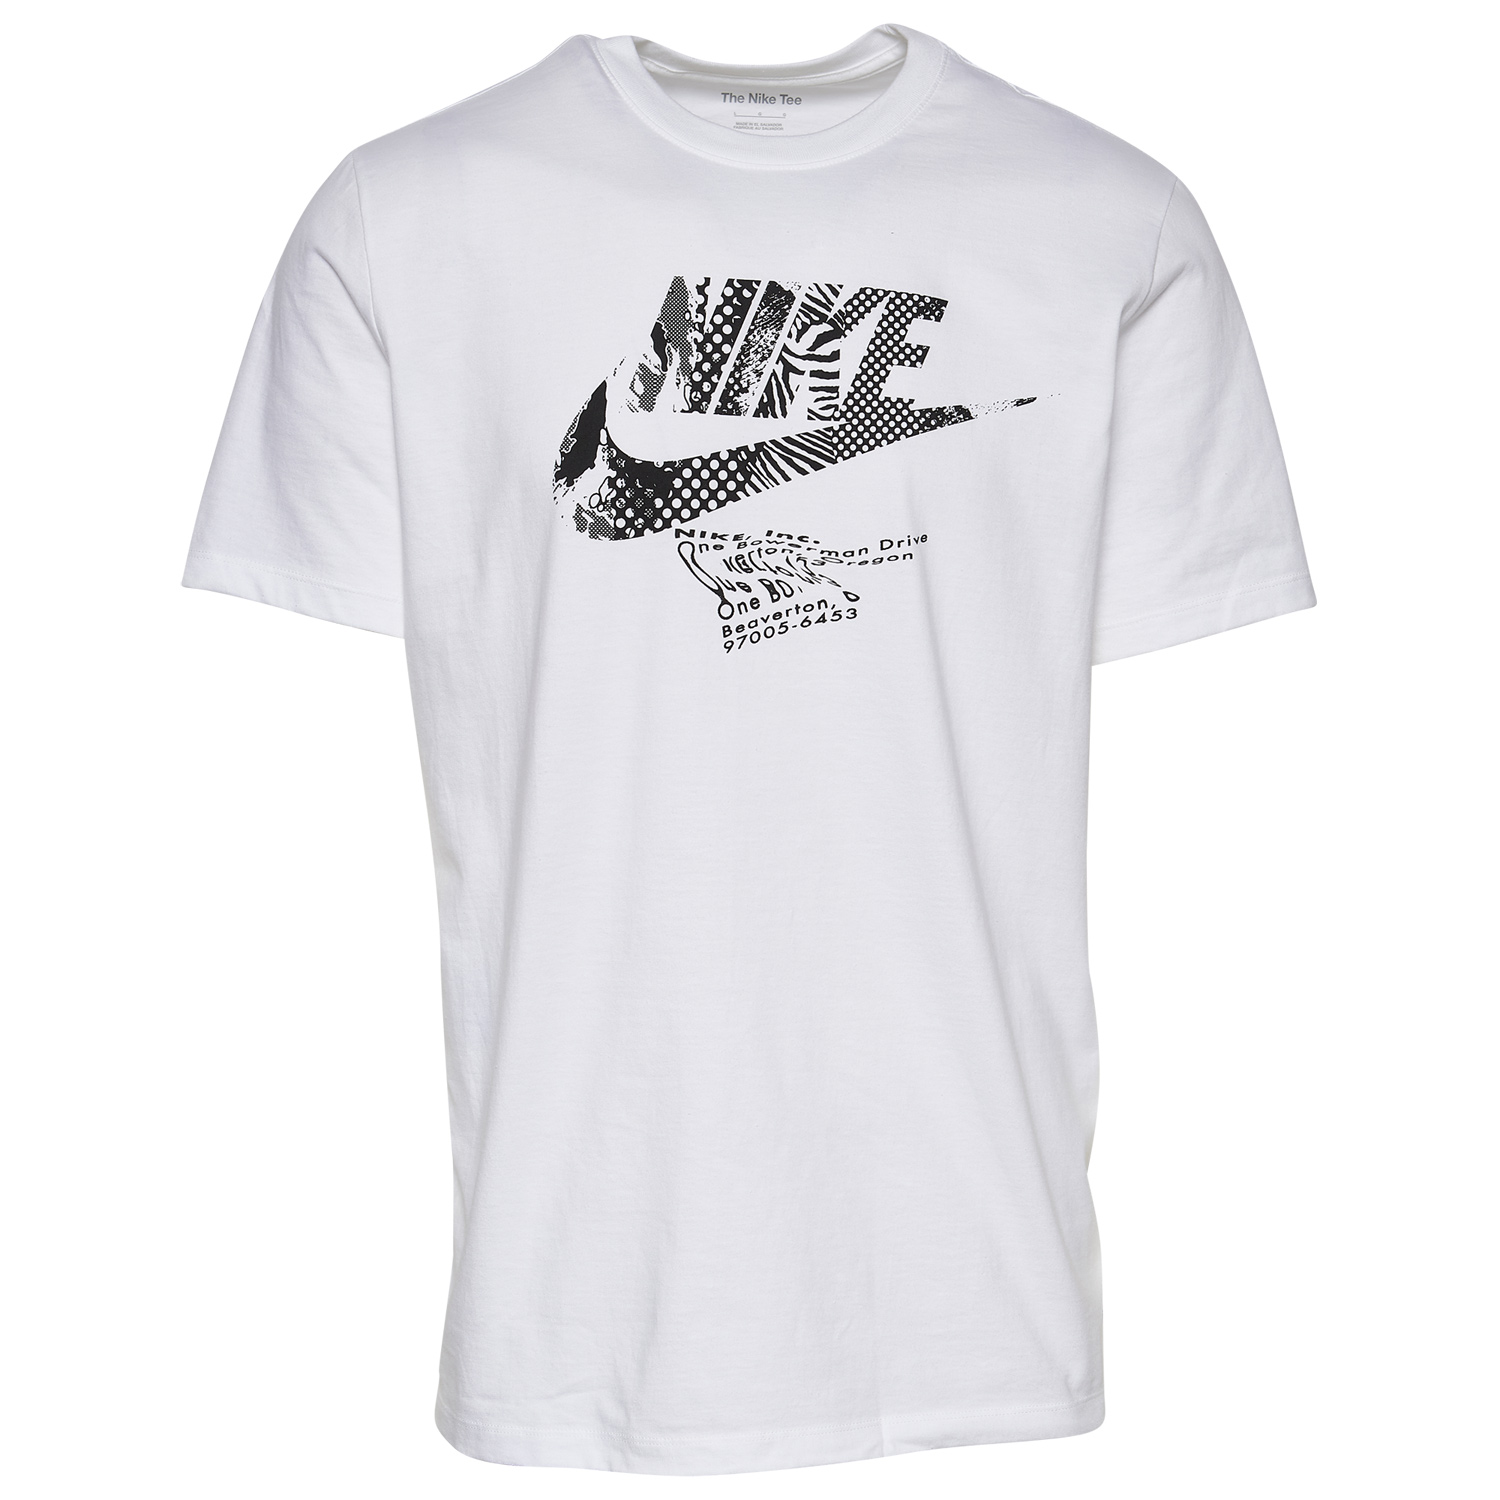 nike-alter-and-reveal-t-shirt-white-black